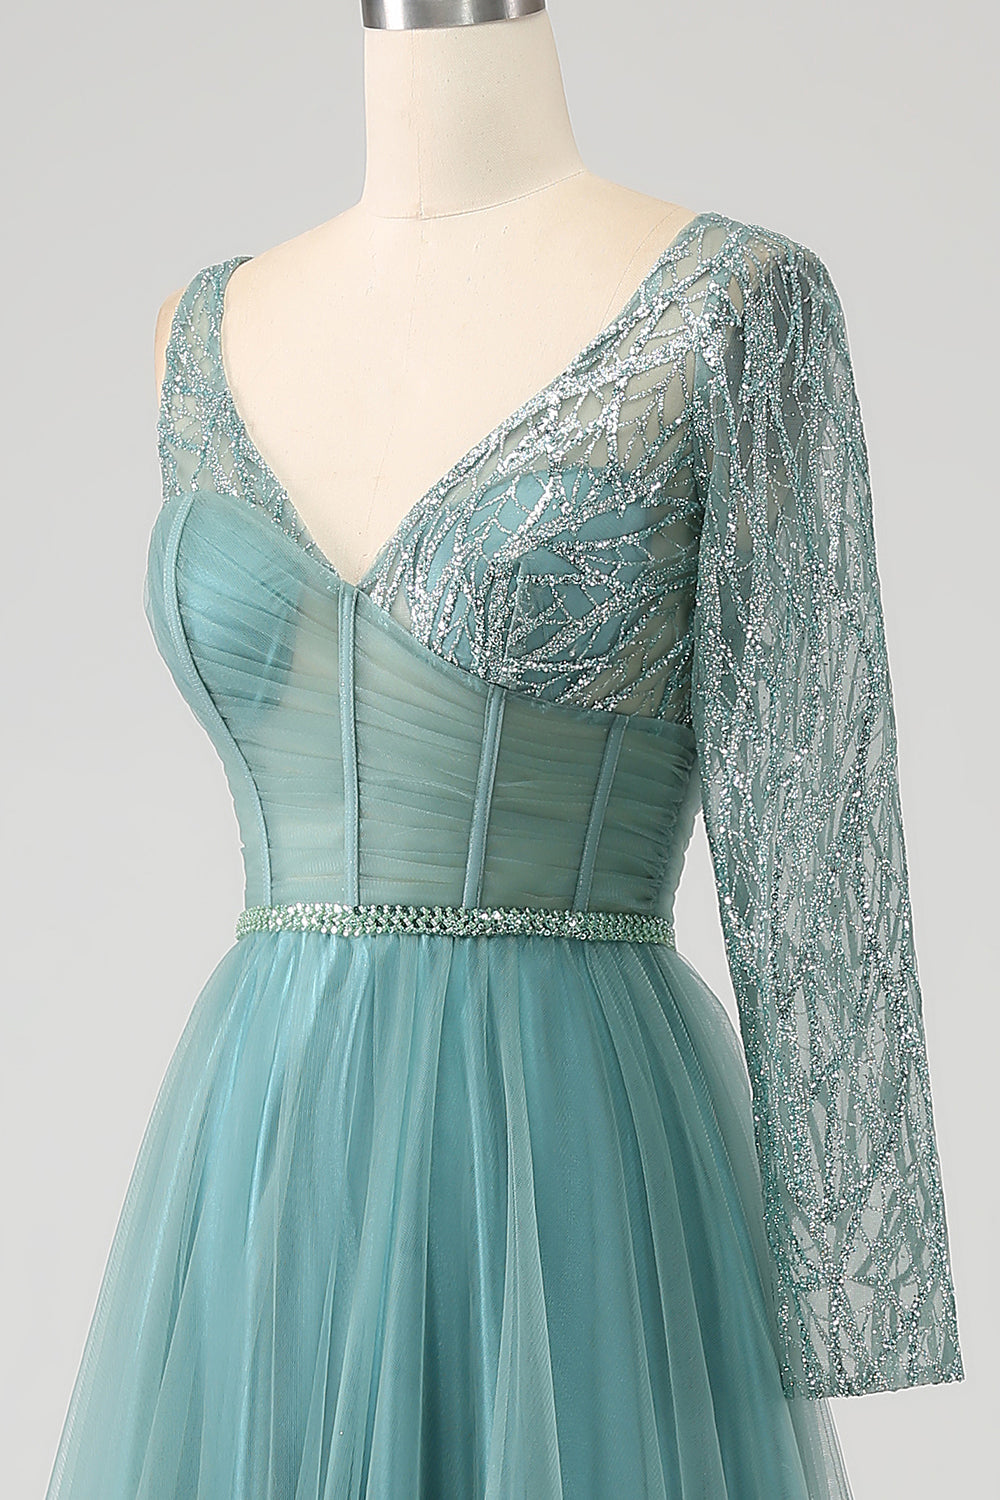 Grey Green A-Line Sparkly Sequin Long Corset Prom Dress